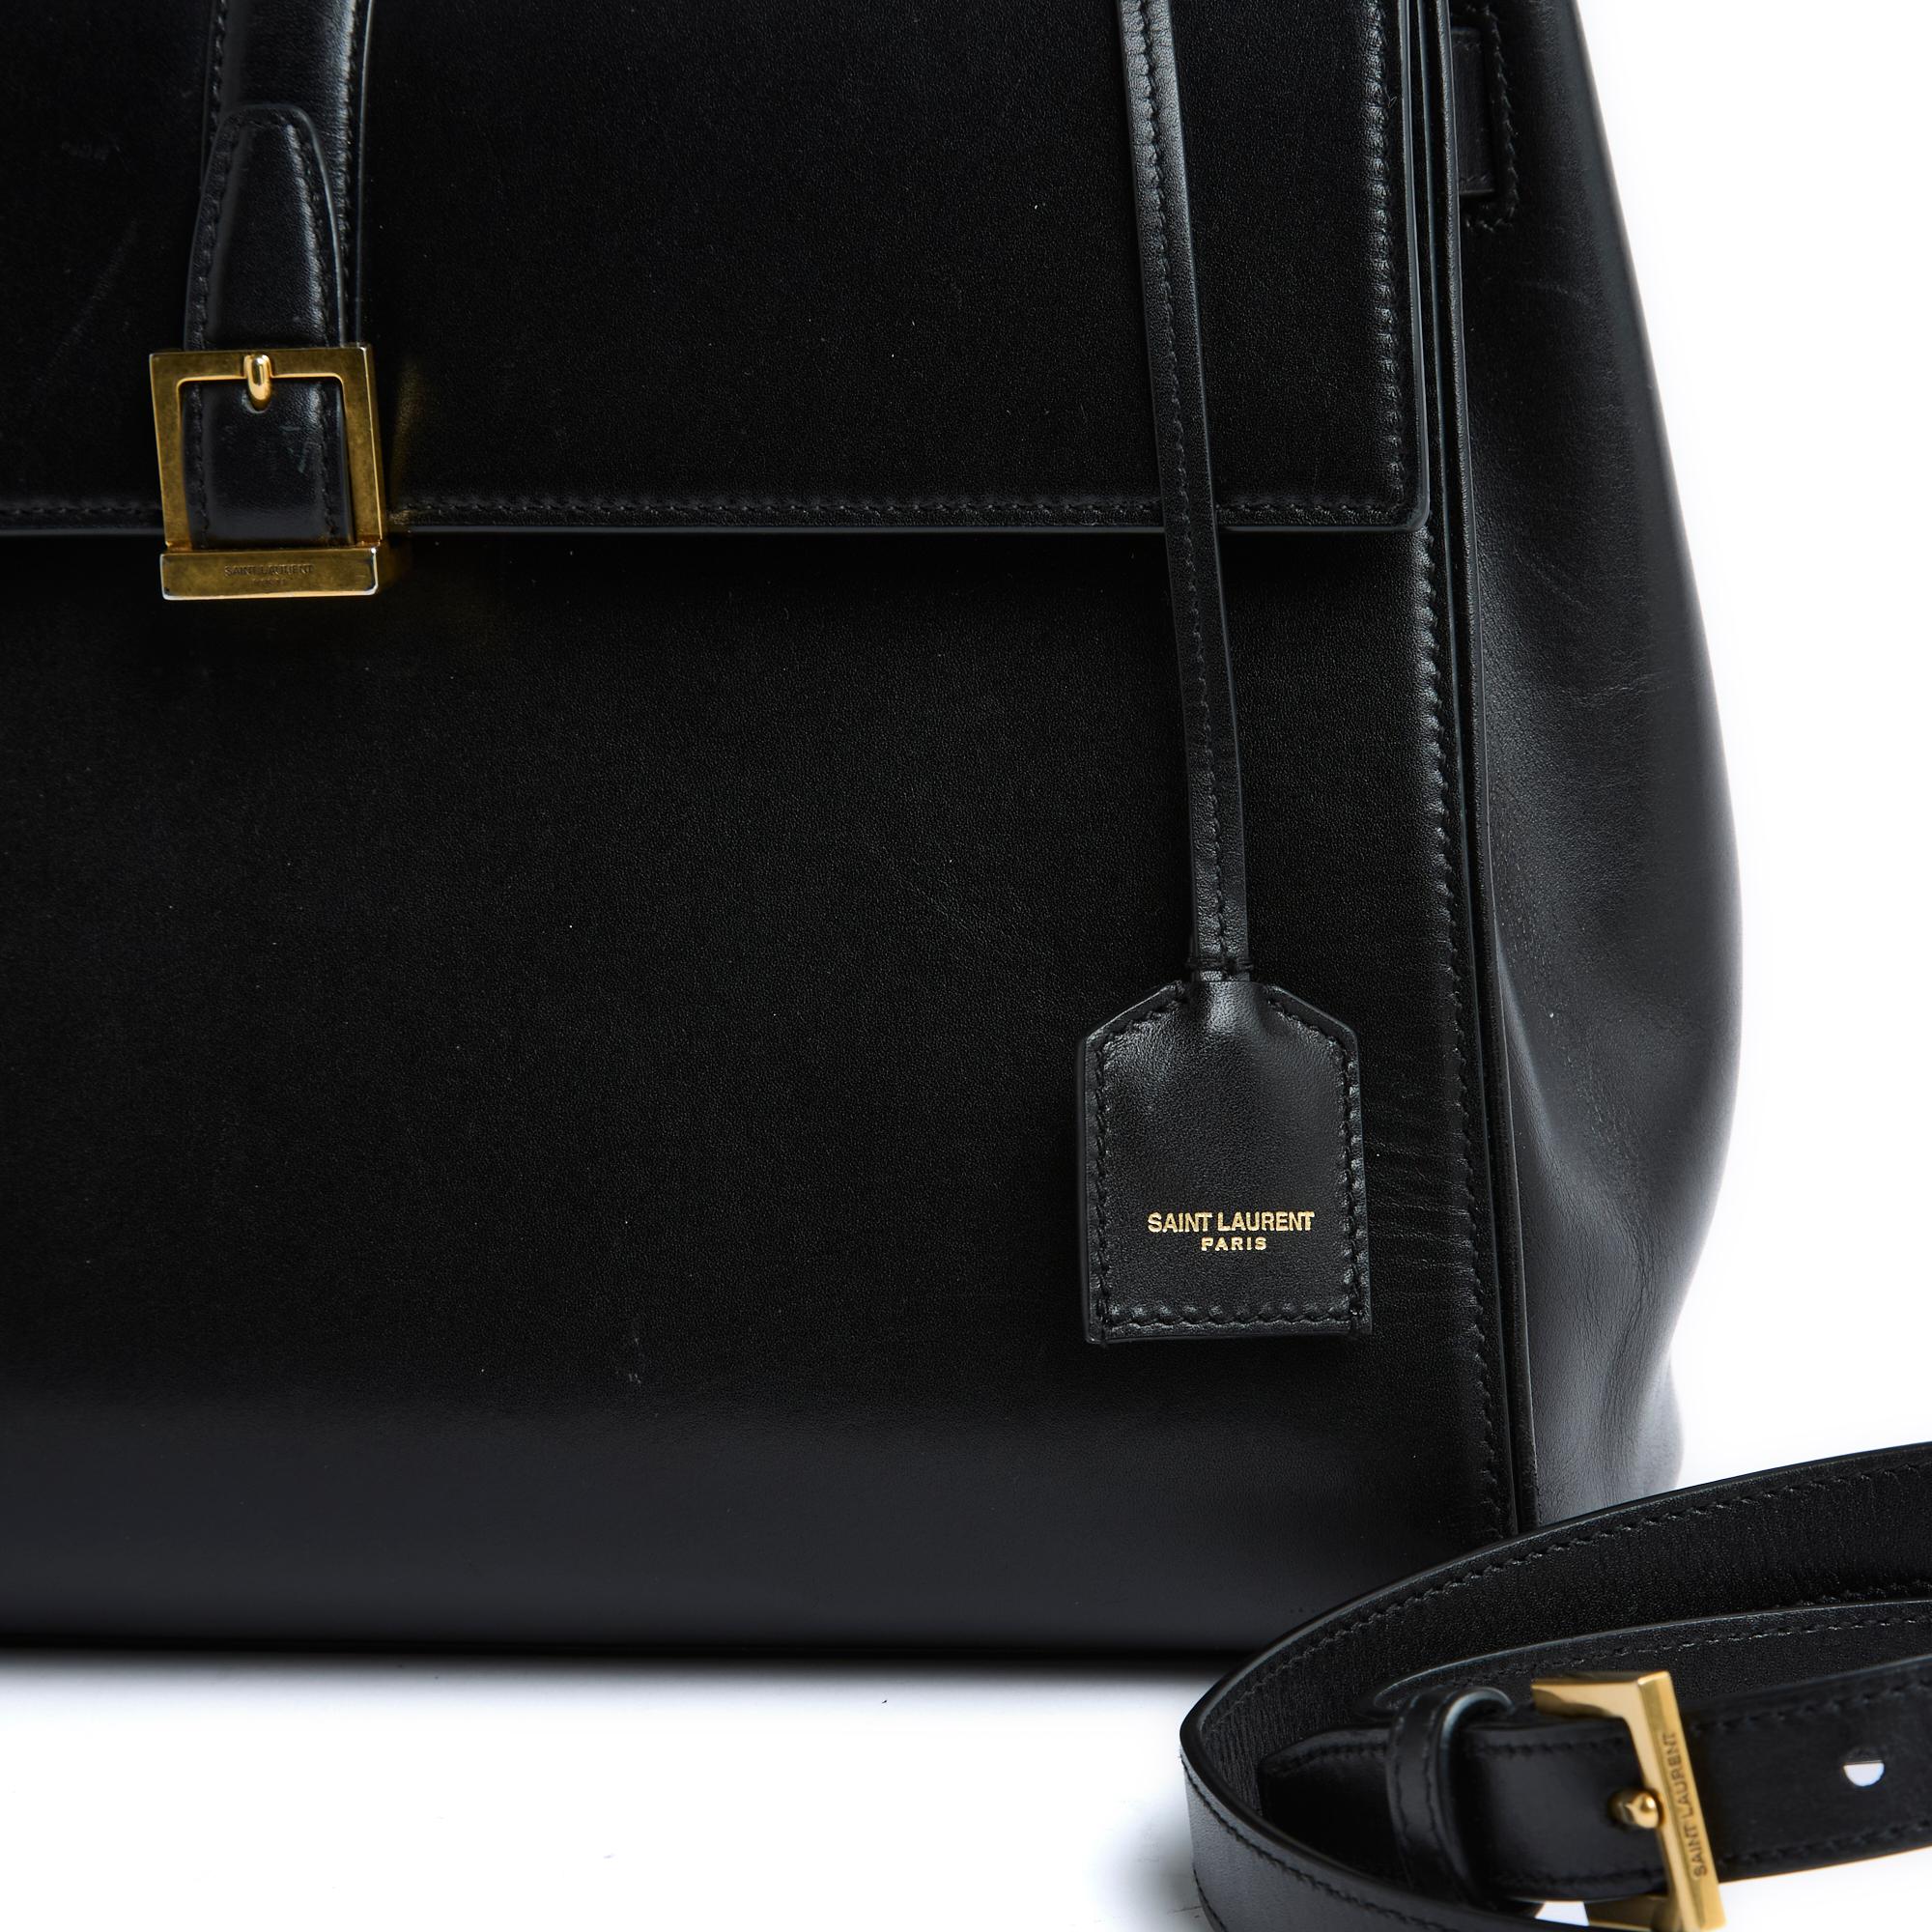 Medium Saint Laurent Le Fermoir model bag in black leather, black leather interior with a zipped pocket closed by a large flap and its famous tilting clasp, 1 last large patch pocket on the back, 1 handle for carrying the hand and 1 removable and